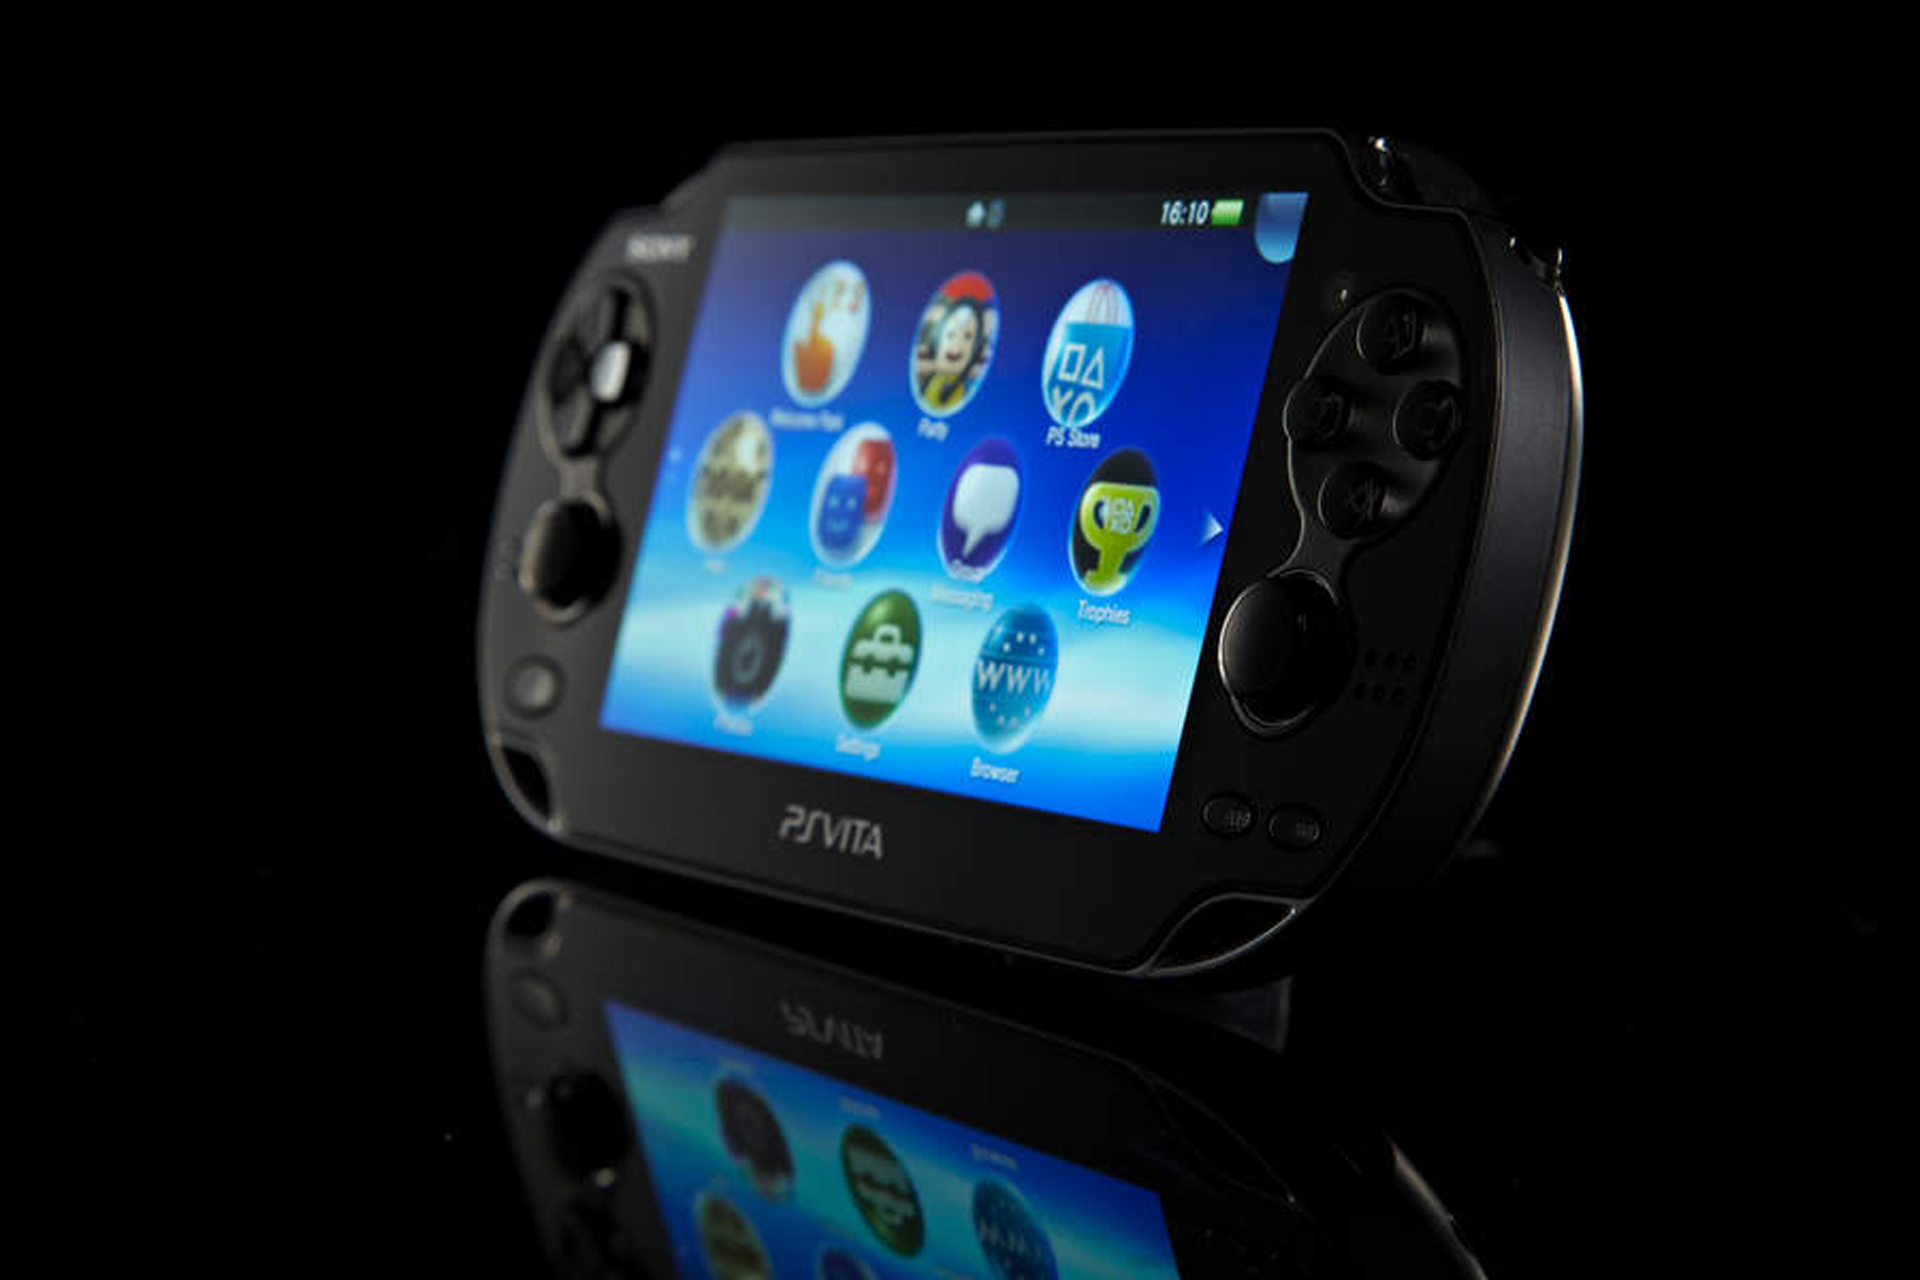 chris tartt recommends download free movies on ps vita pic